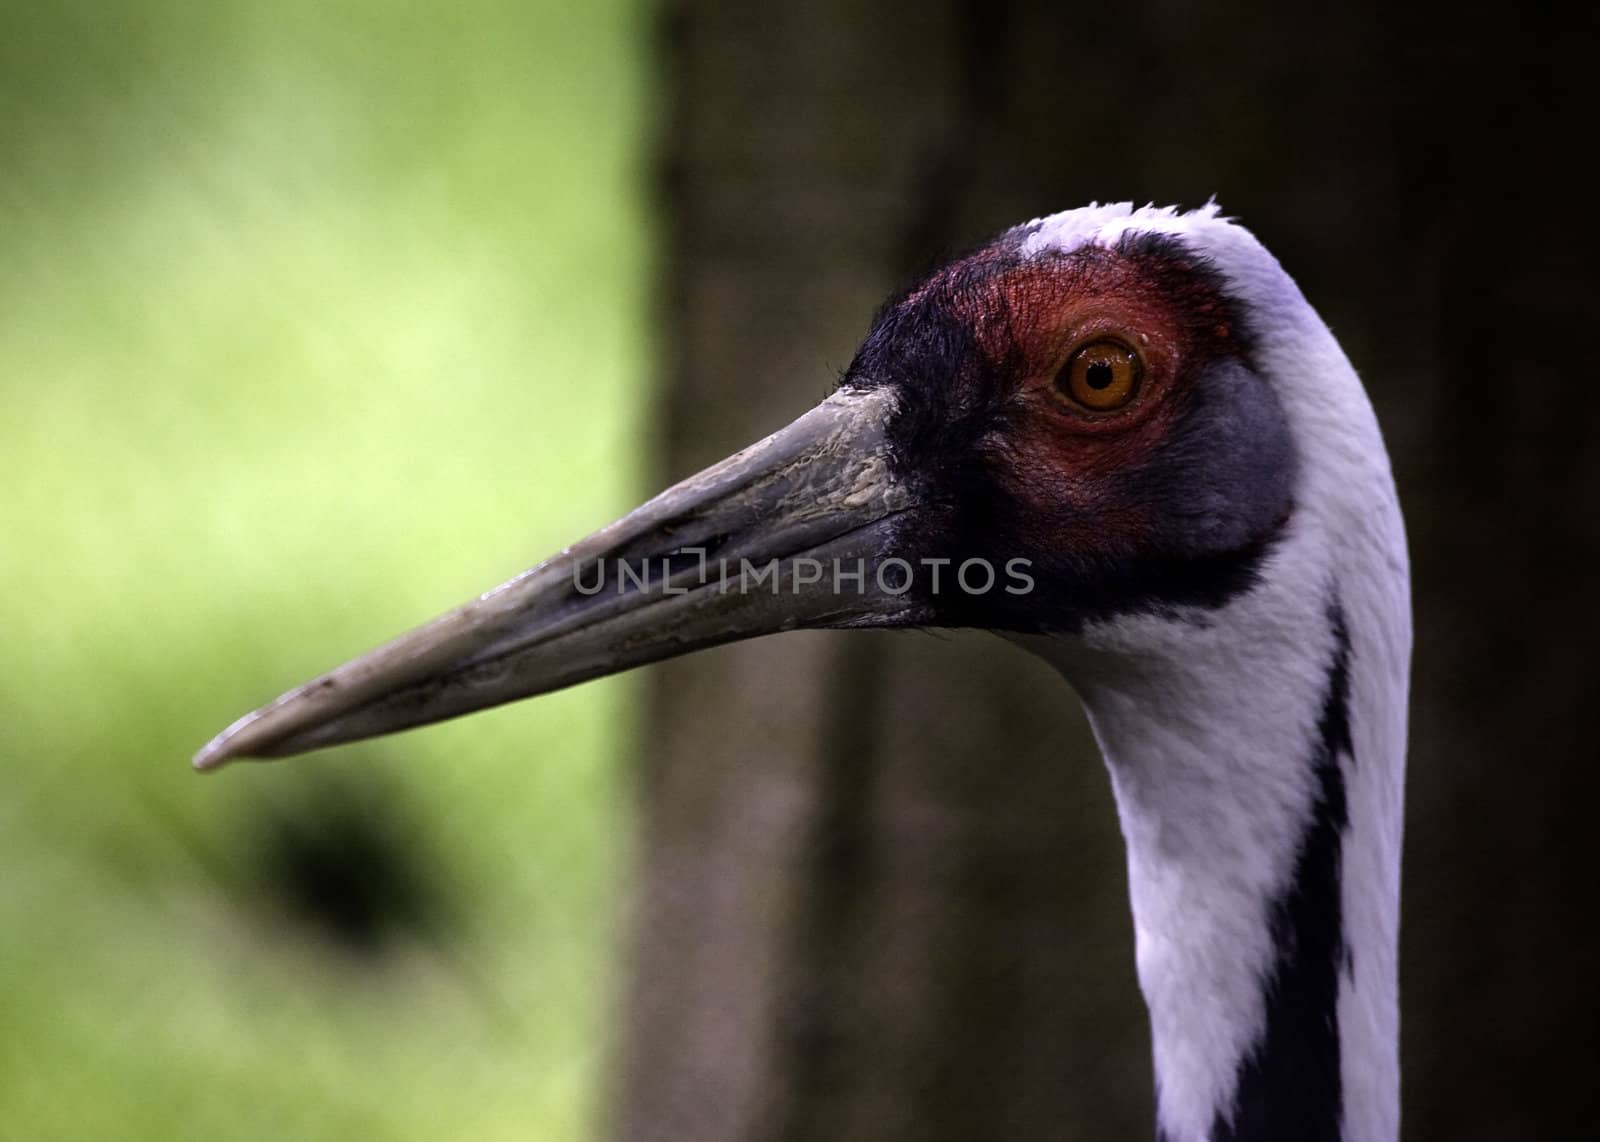 Sandhill White Feathered Crane, Close Up of Head and Red Eye, Grus Canadensis

Resubmit--In response to comments from reviewer have further processed image to reduce noise, sharpen focus and adjust lighting.